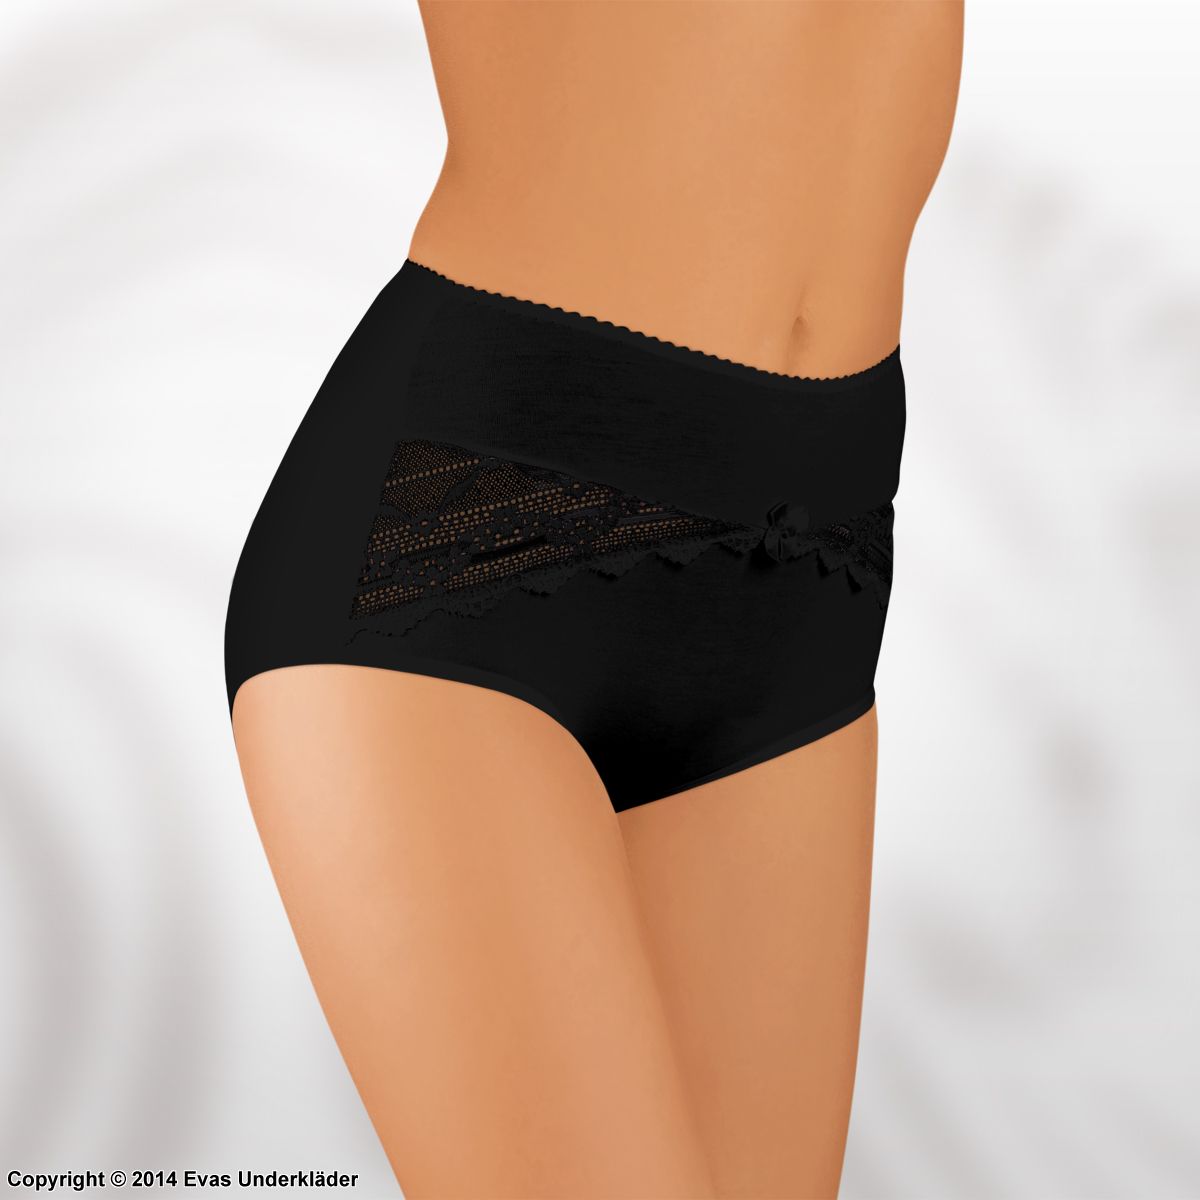 Briefs, high quality cotton, lace inlays, slightly higher waist, S to 4XL